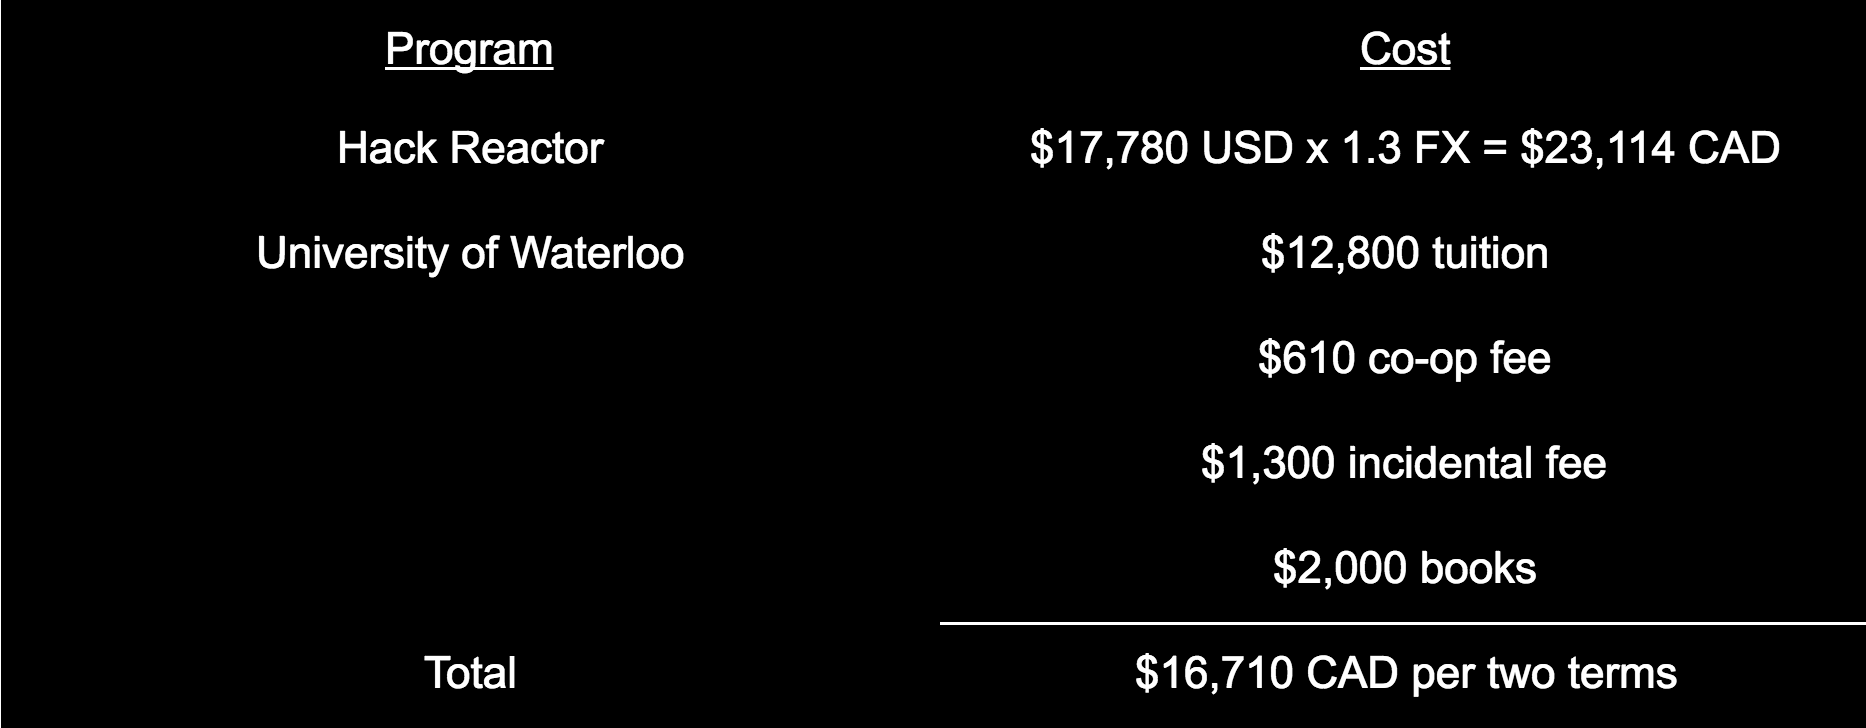 Hack Reactor: $17,780 USD x 1.3 FX = $23,114 CAD. Waterloo: $12,800 + $610 + $1,300 + $2,000 = $16,710 for 8 months of study